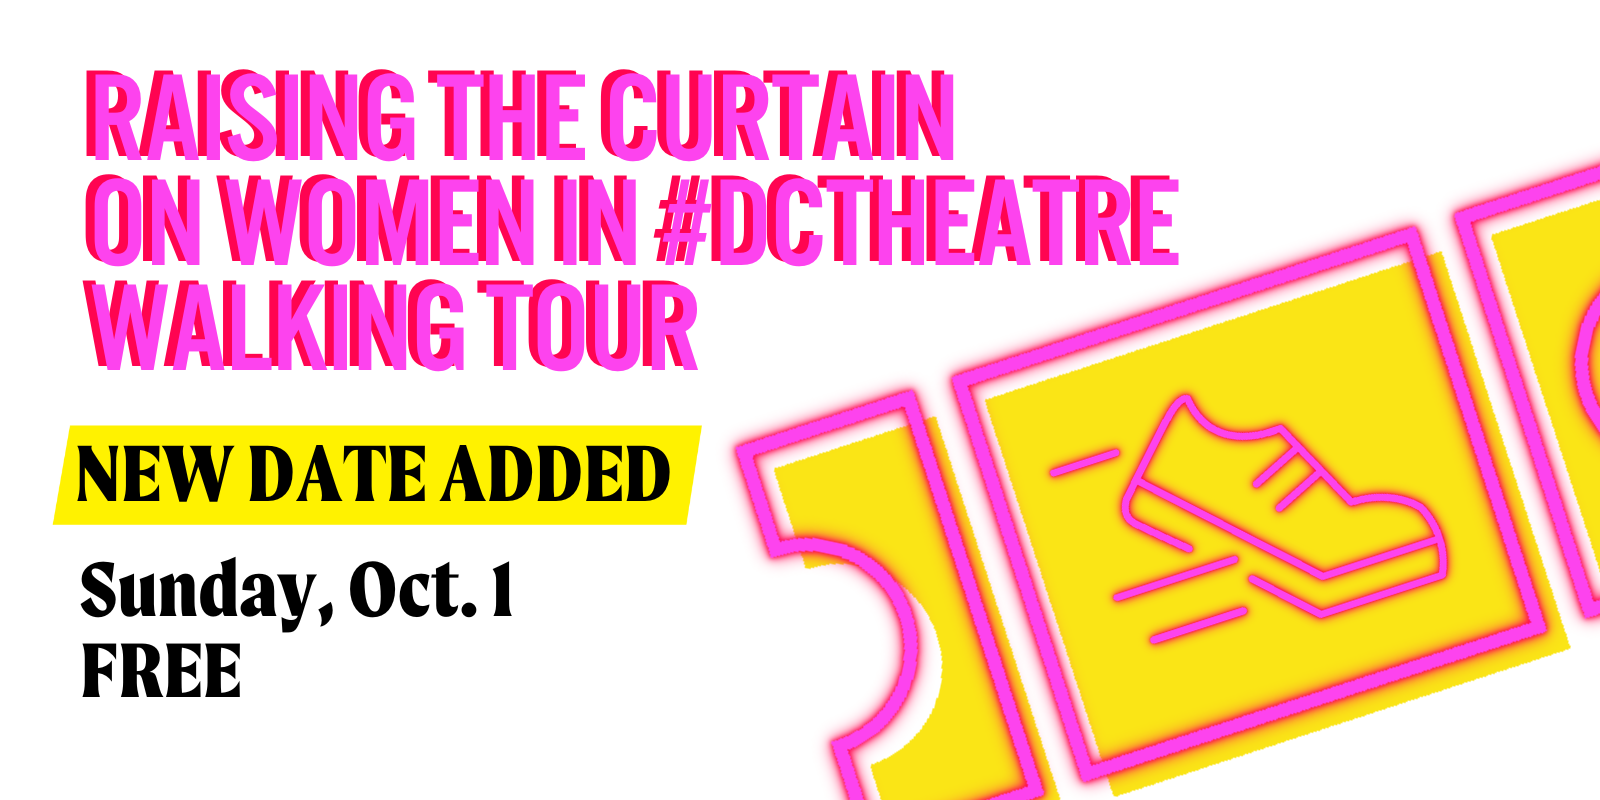 raising the curtain on women in #dctheatre walking tour sunday october 1 free